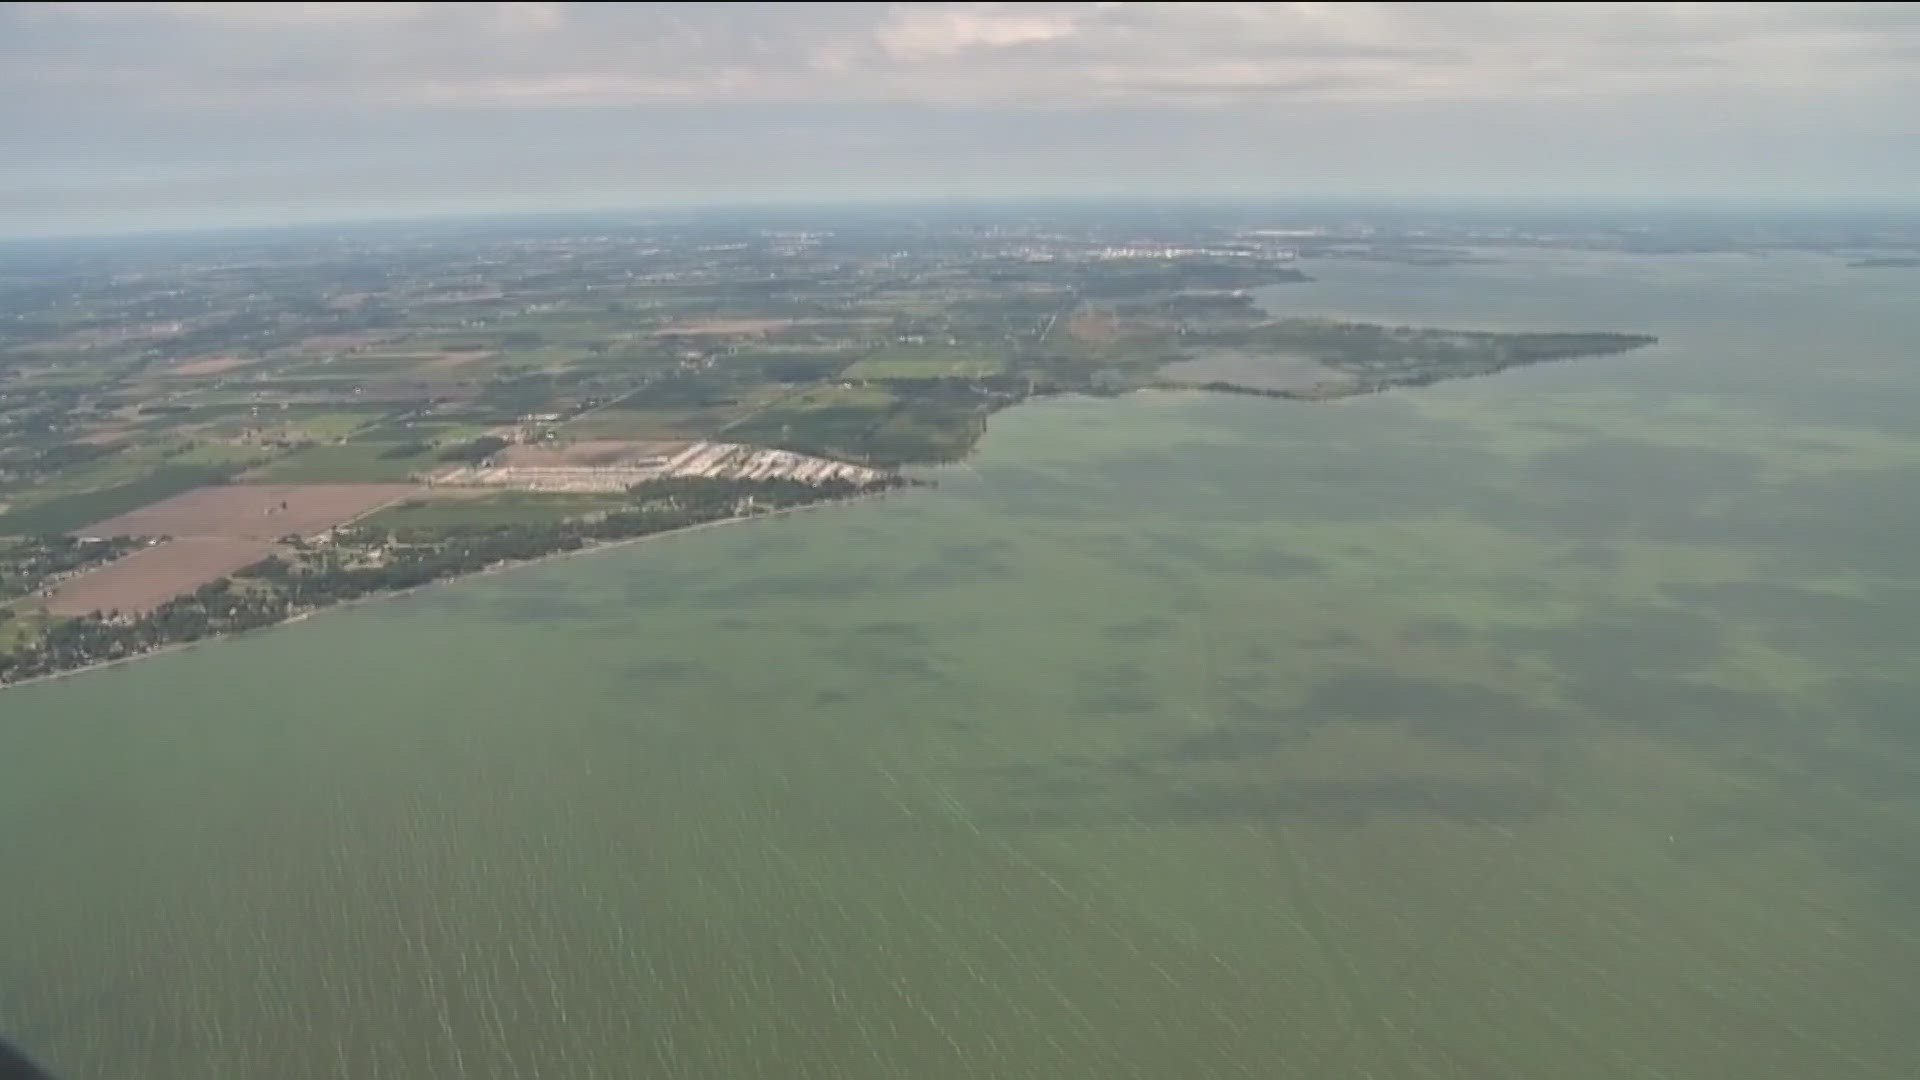 A federal judge ruled the Ohio EPA is now required to regulate Lake Erie toxins after the city of Toledo sued the organization for poor lake water quality.